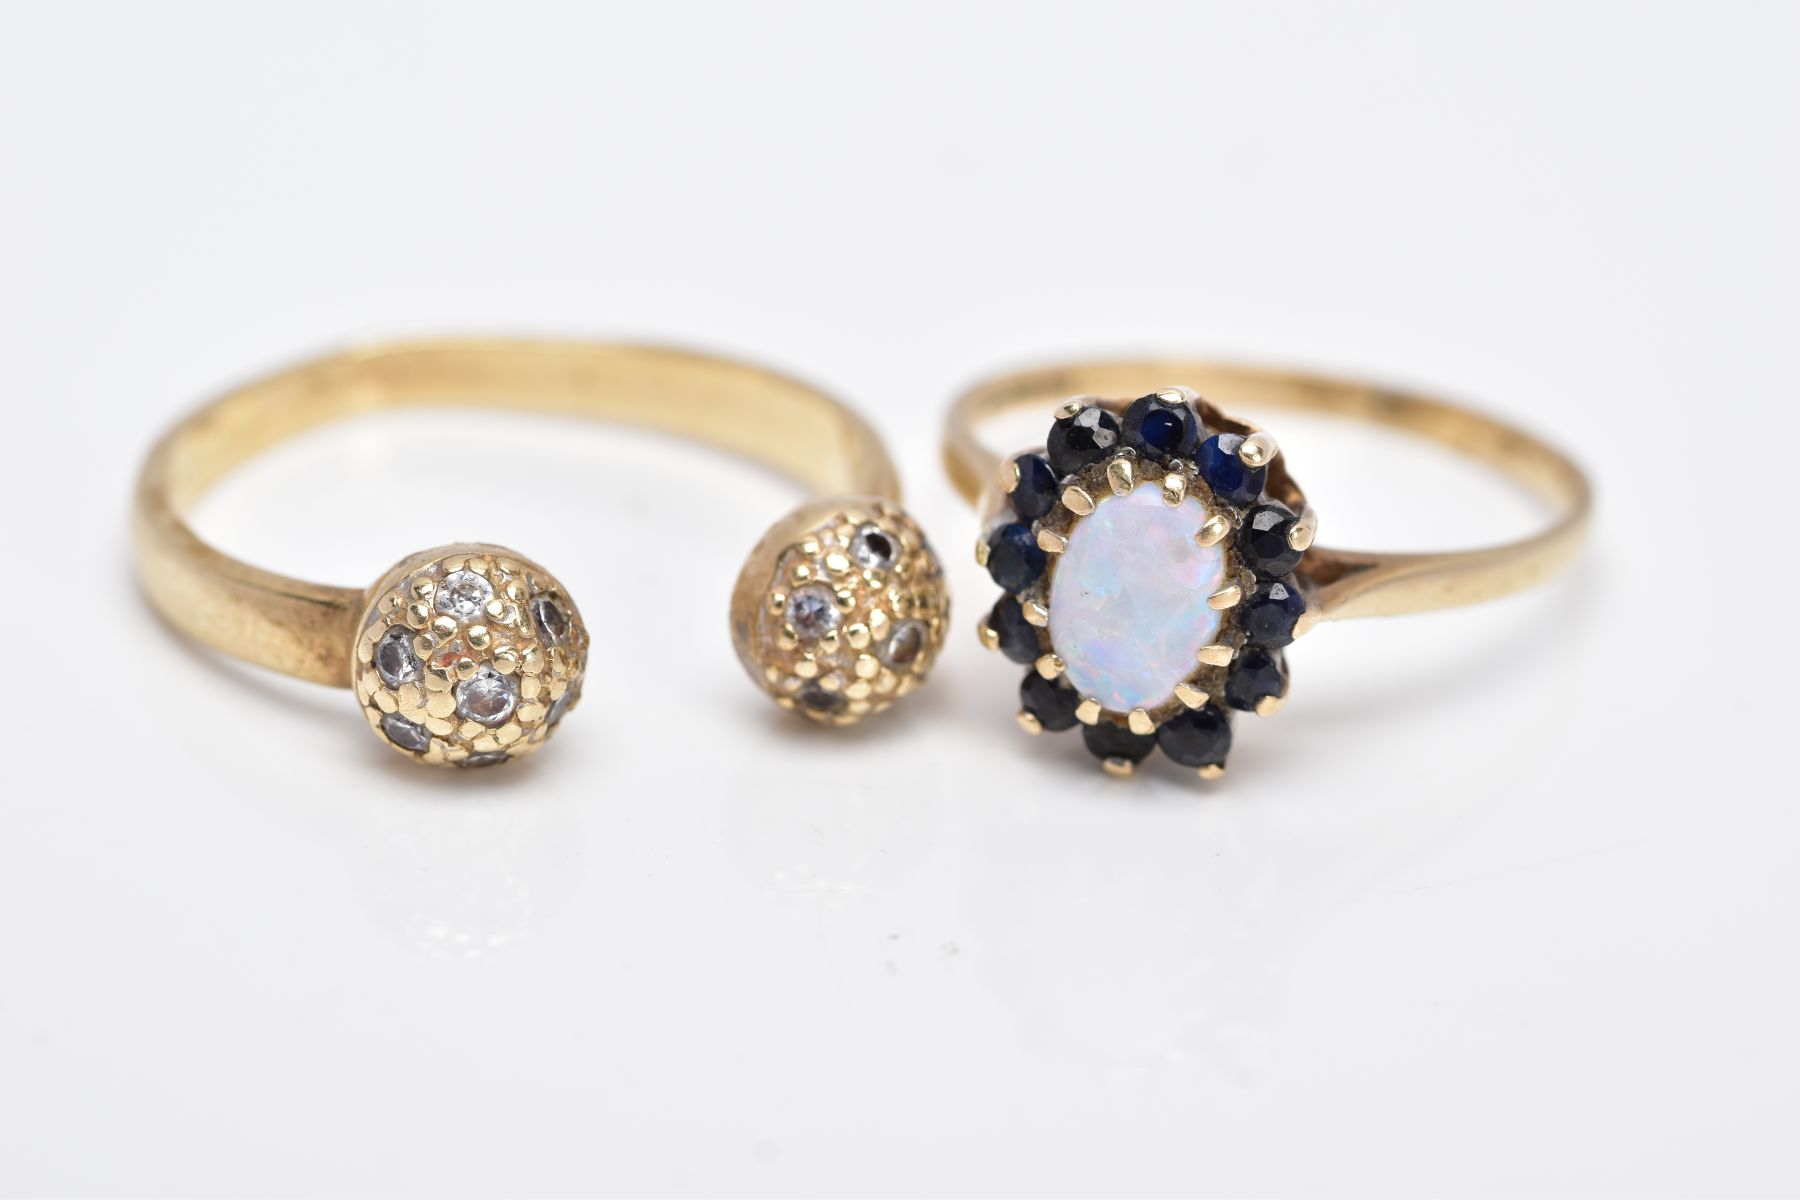 TWO 9CT GOLD RINGS, the first of a cluster design, centering on an oval cut opal cabochon, within